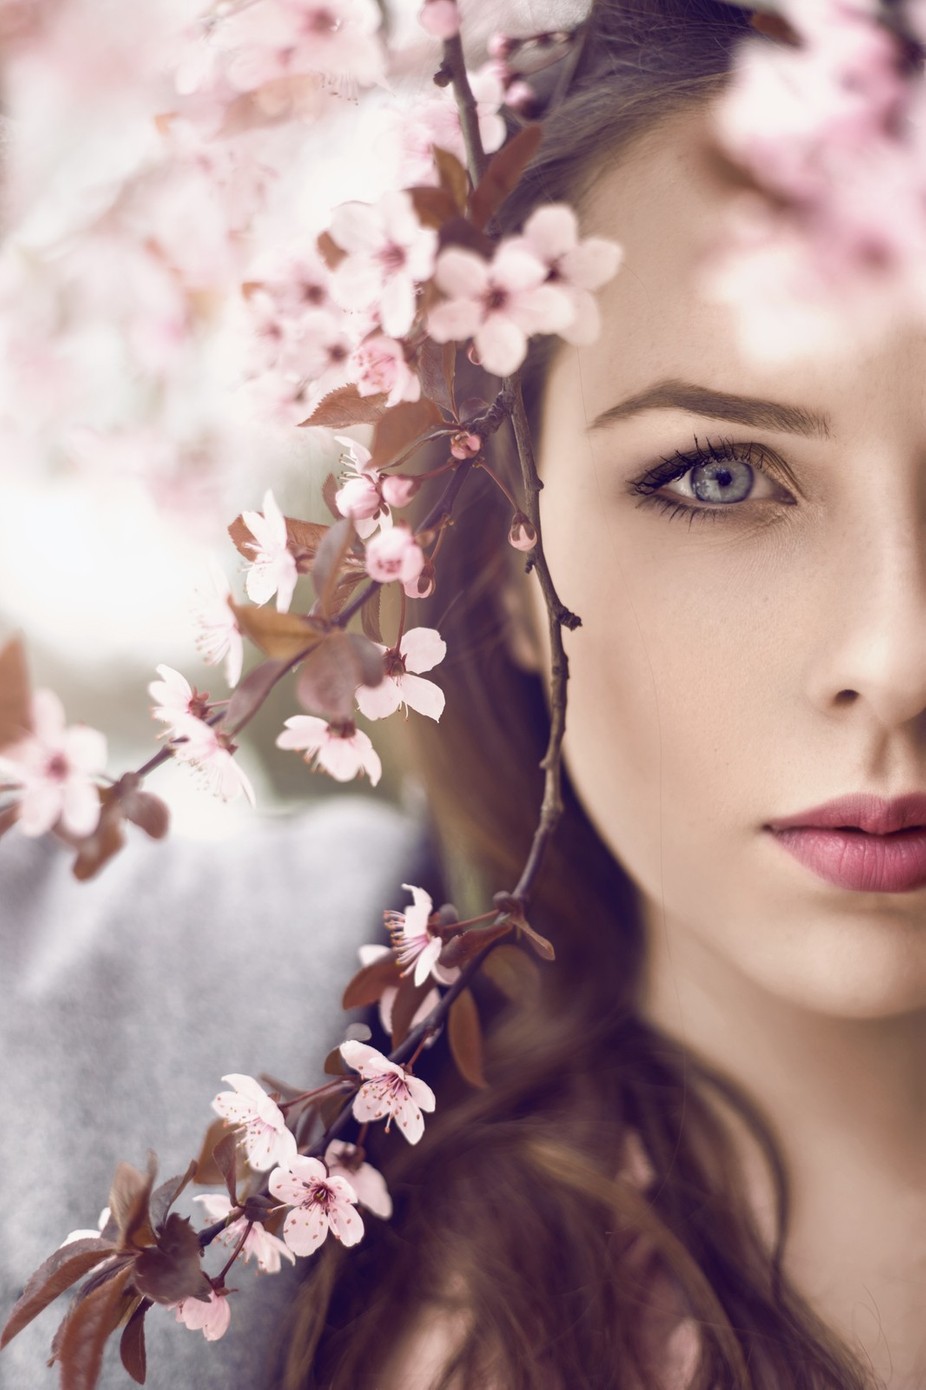 Spring by NinaMasic - A World Of Pink Photo Contest